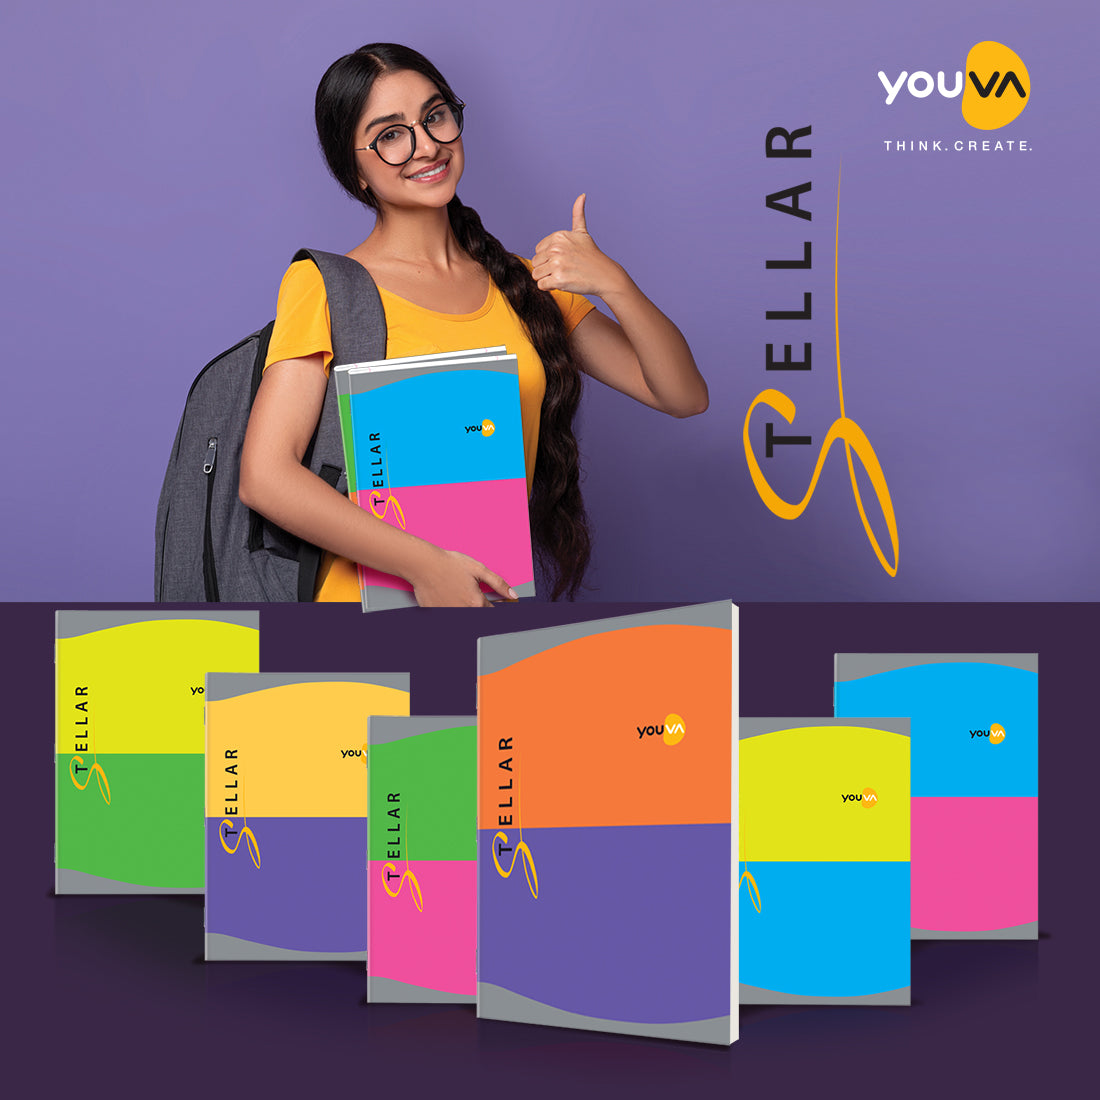 Navneet Youva Stellar | Soft Bound upgraded Long Book for students | A4 size- 21 cm x 29.7 cm | Single Line | 196 Pages | Pack of 2